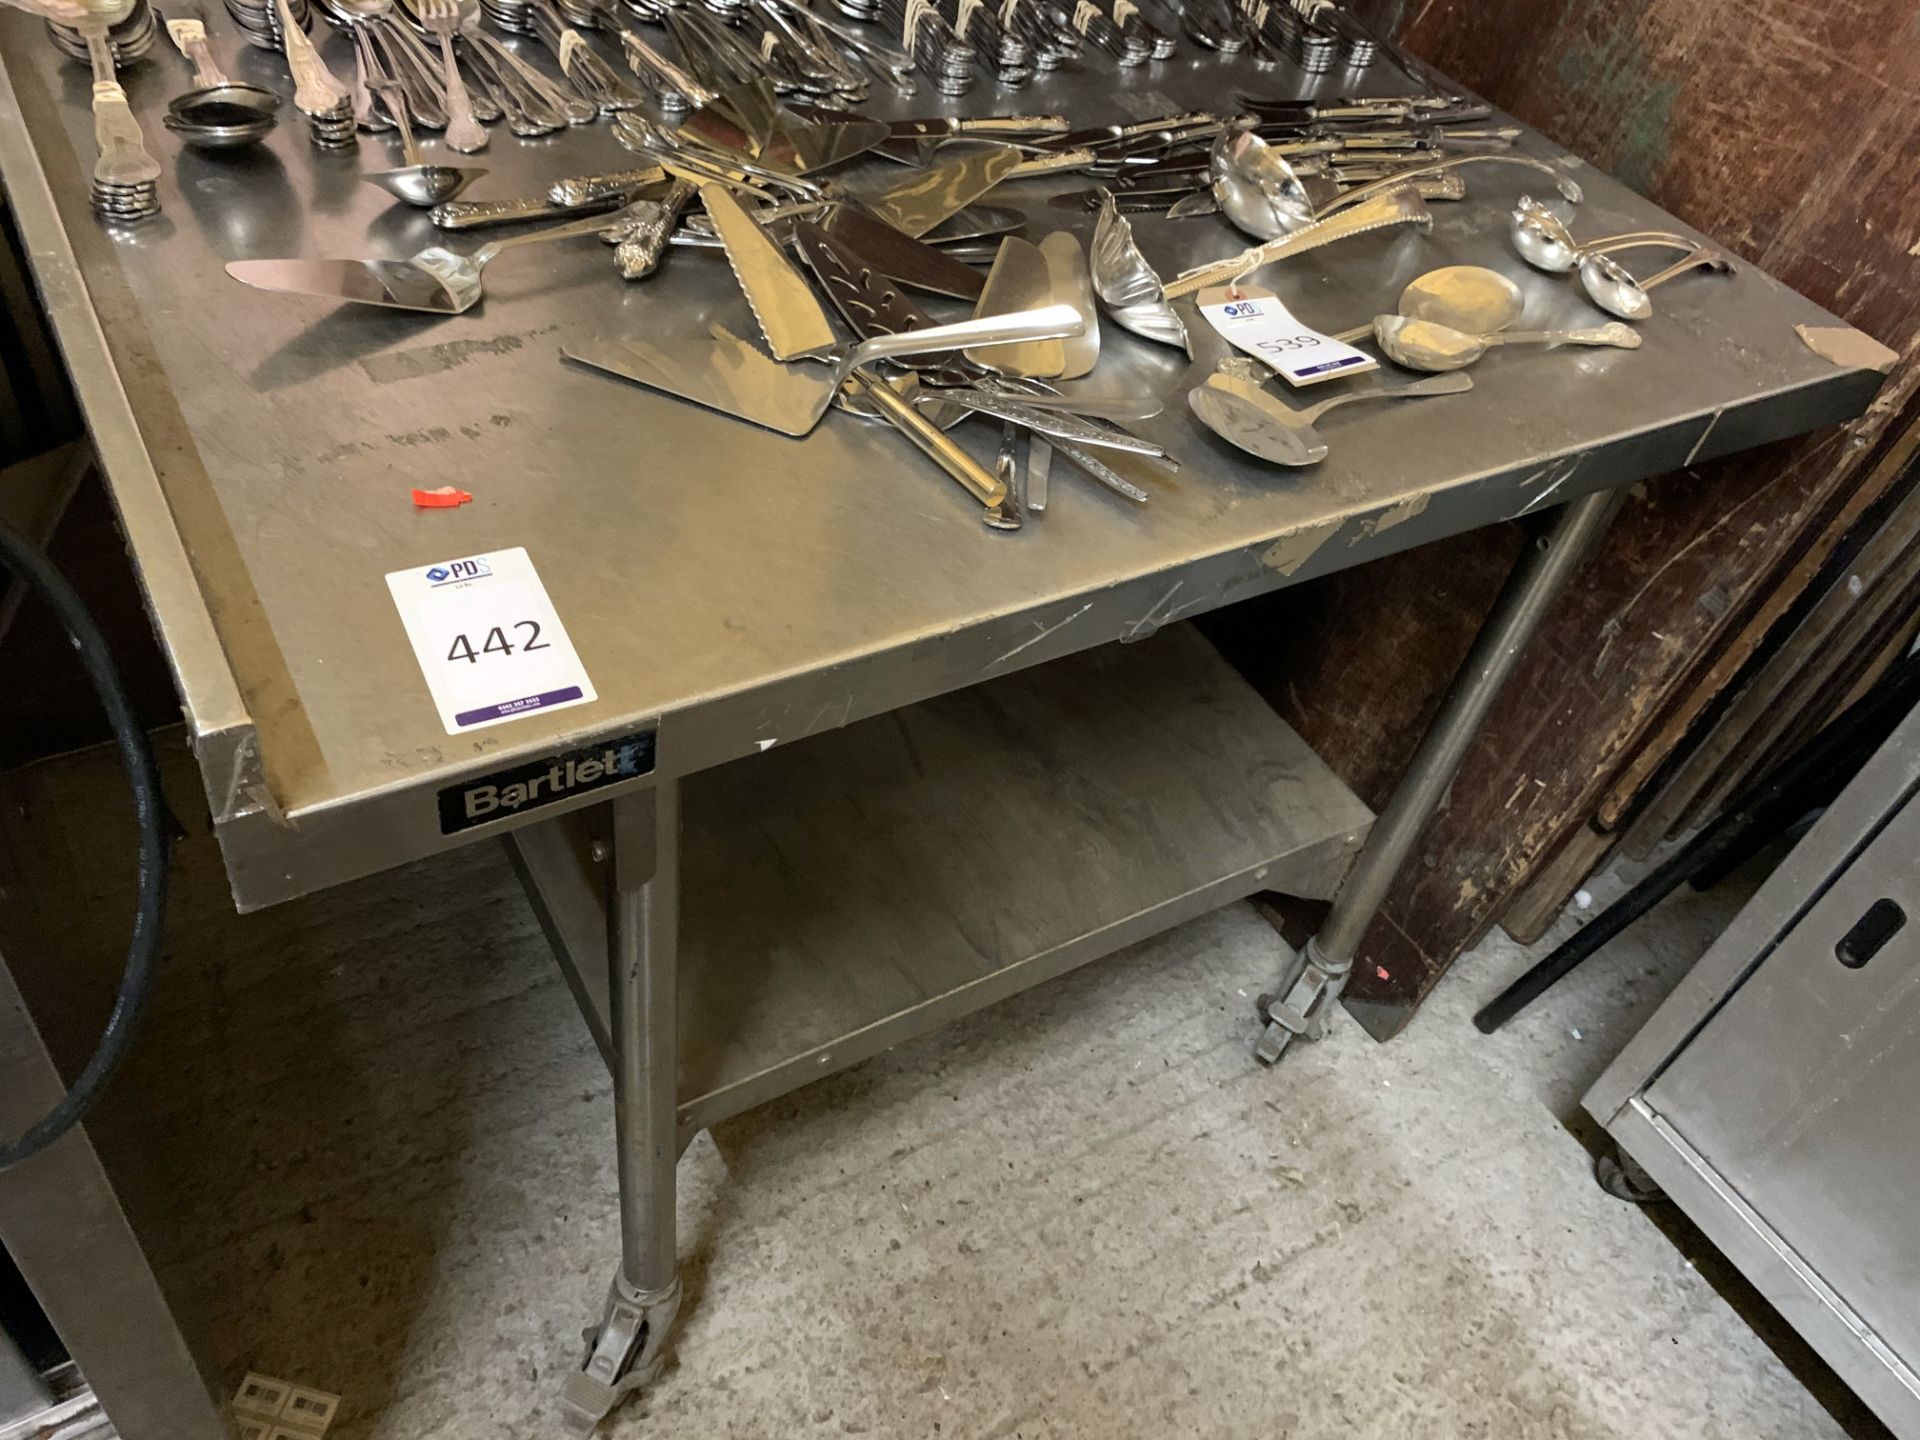 Bartlett Mobile Stainless Steel Preparation Table with Lower Shelf (Located Elstree – See General